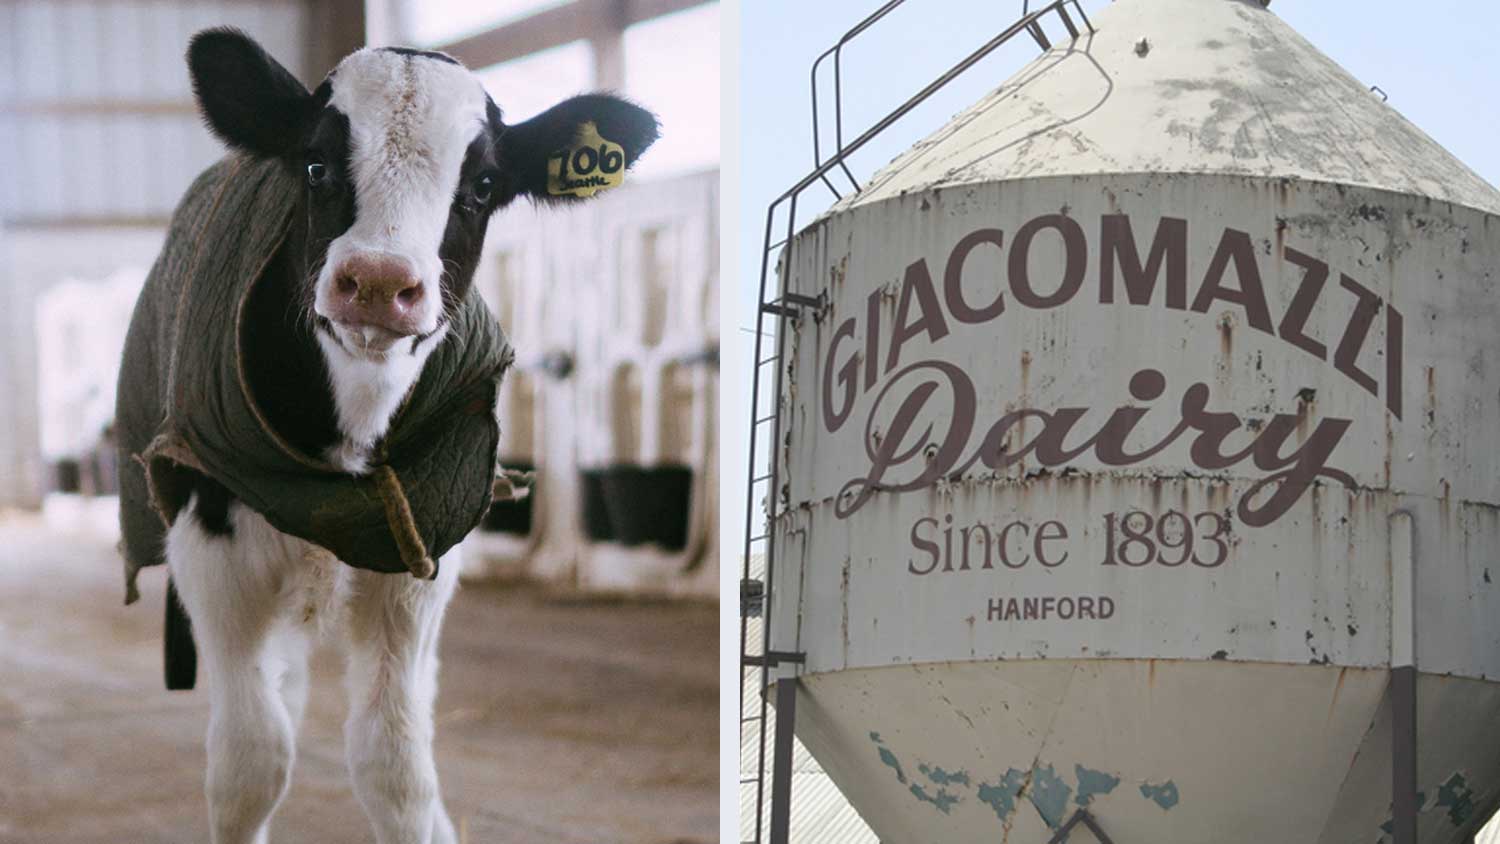 What is the largest dairy in California?